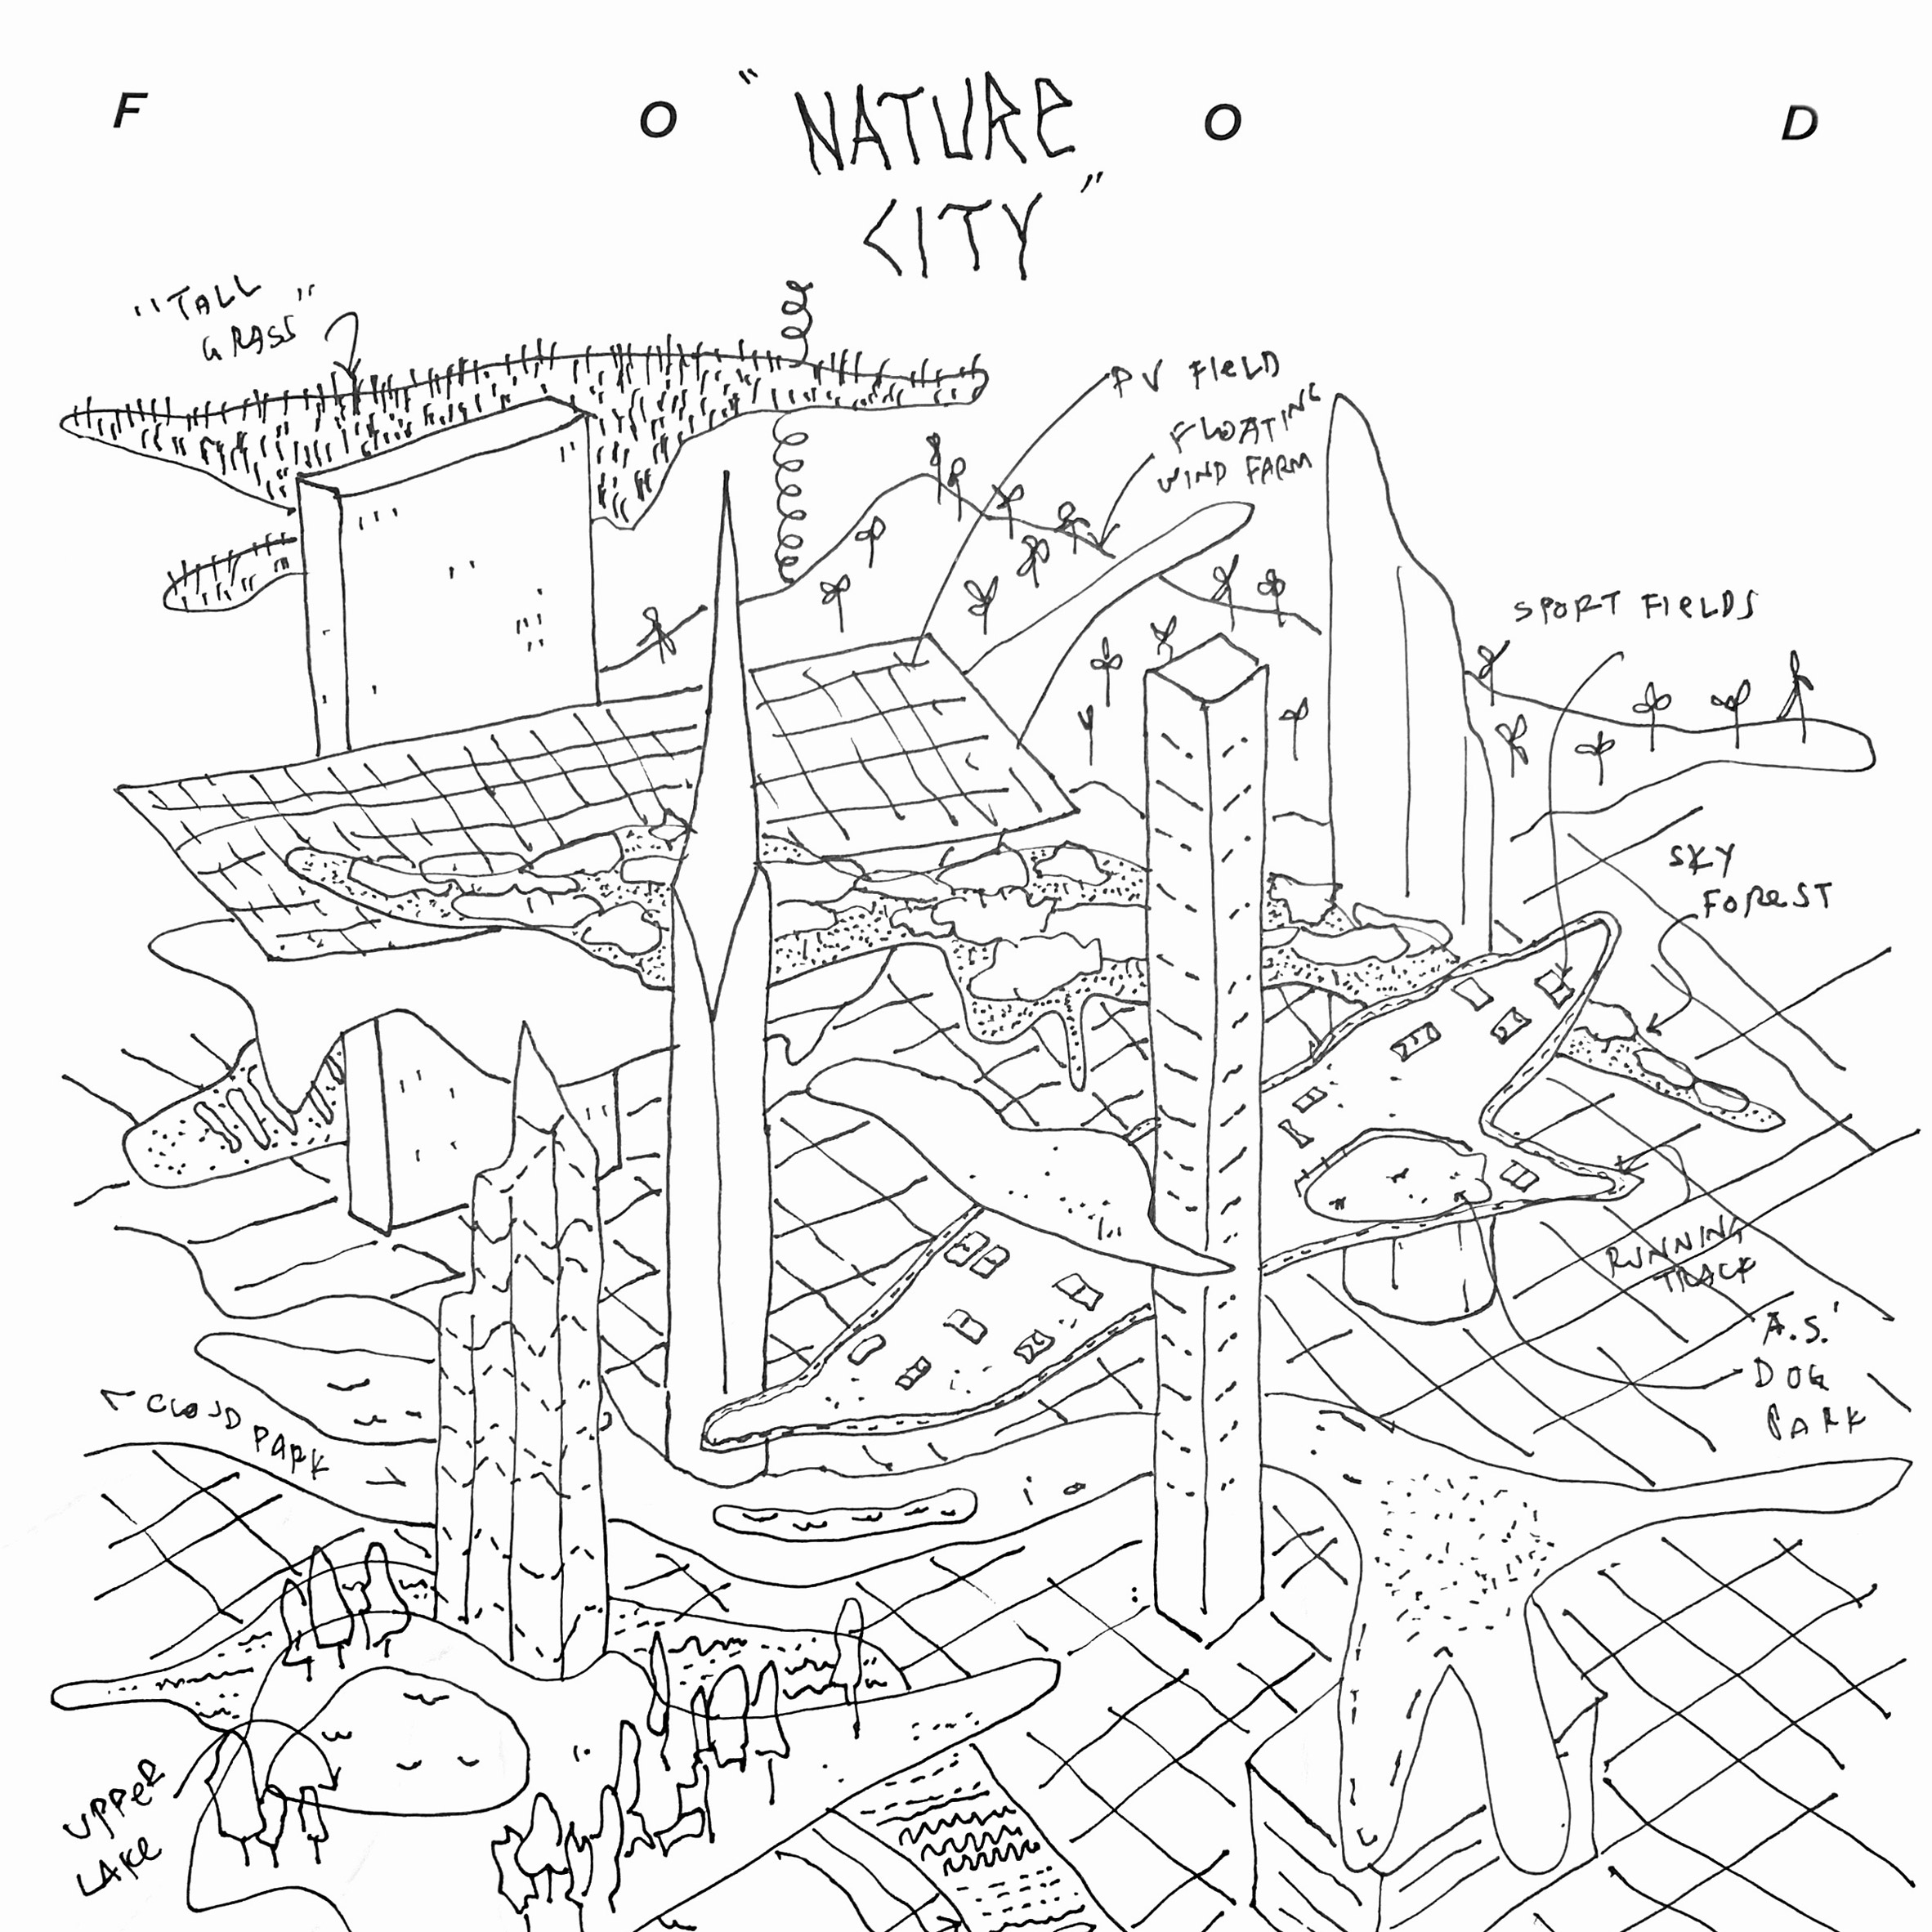 Dong-Ping Wong and Virgil Abloh design a city in 15 minutes